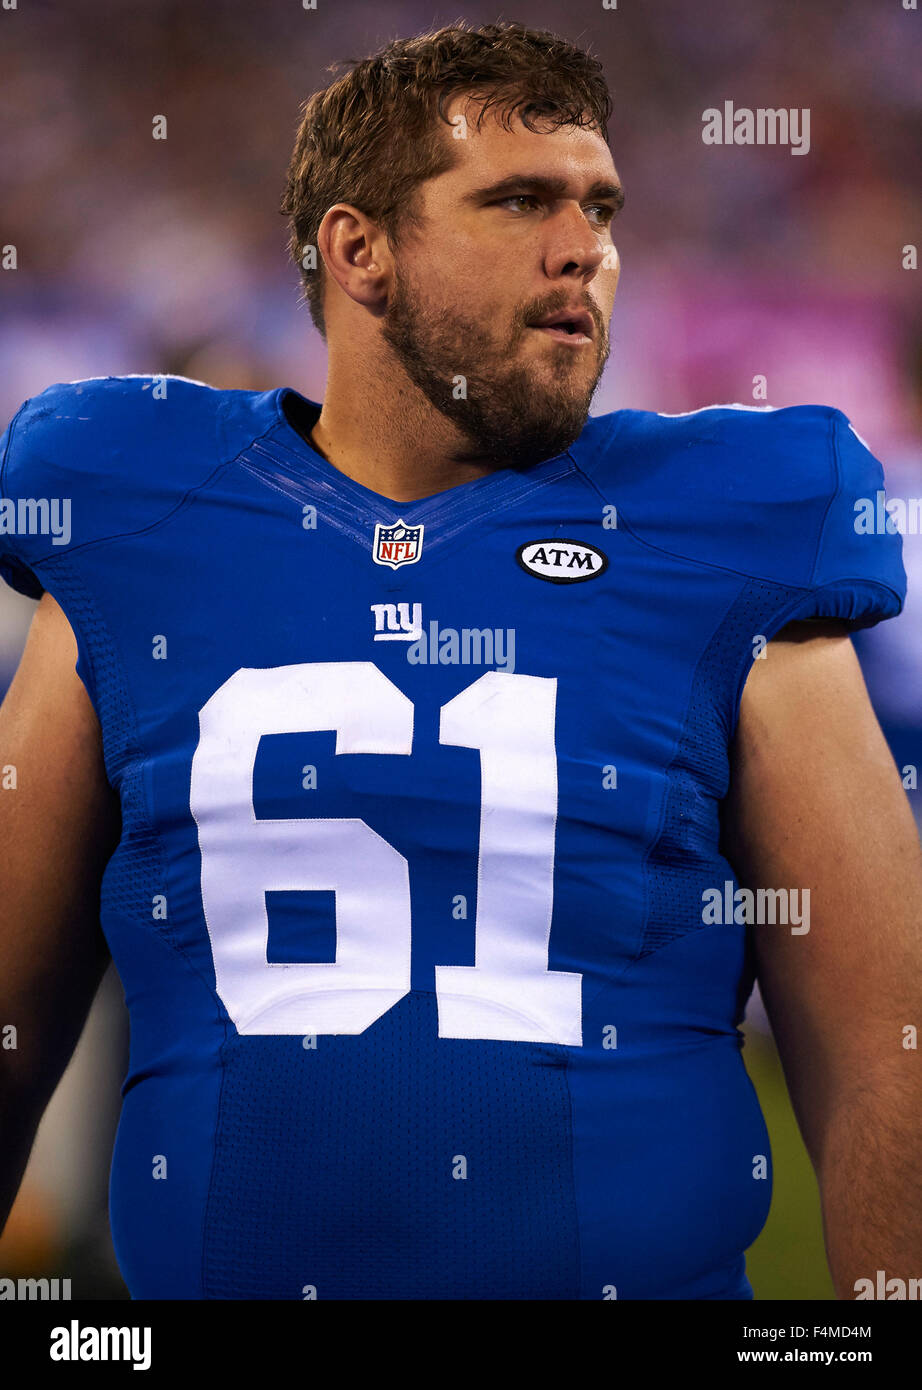 Giants' center Dallas Reynolds (61) during NFL action between the San  Francisco 49ers and the New York Giants at Met Life Stadium in East  Rutherford, New Jersey. The Giants defeated the 49ers